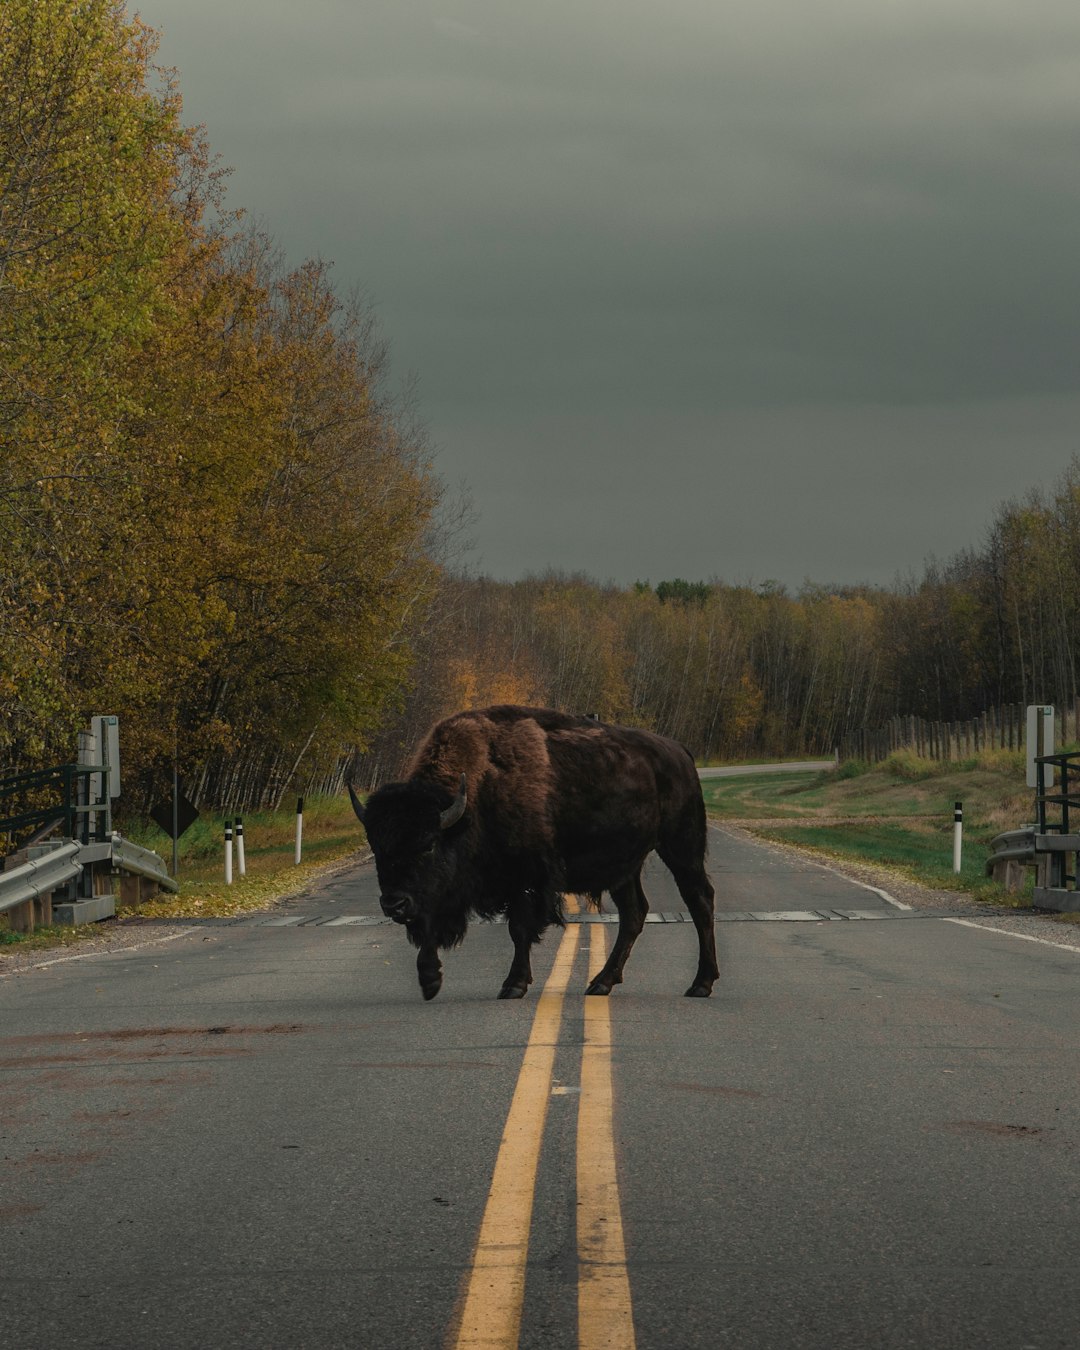 Travel Tips and Stories of Elk Island National Park in Canada